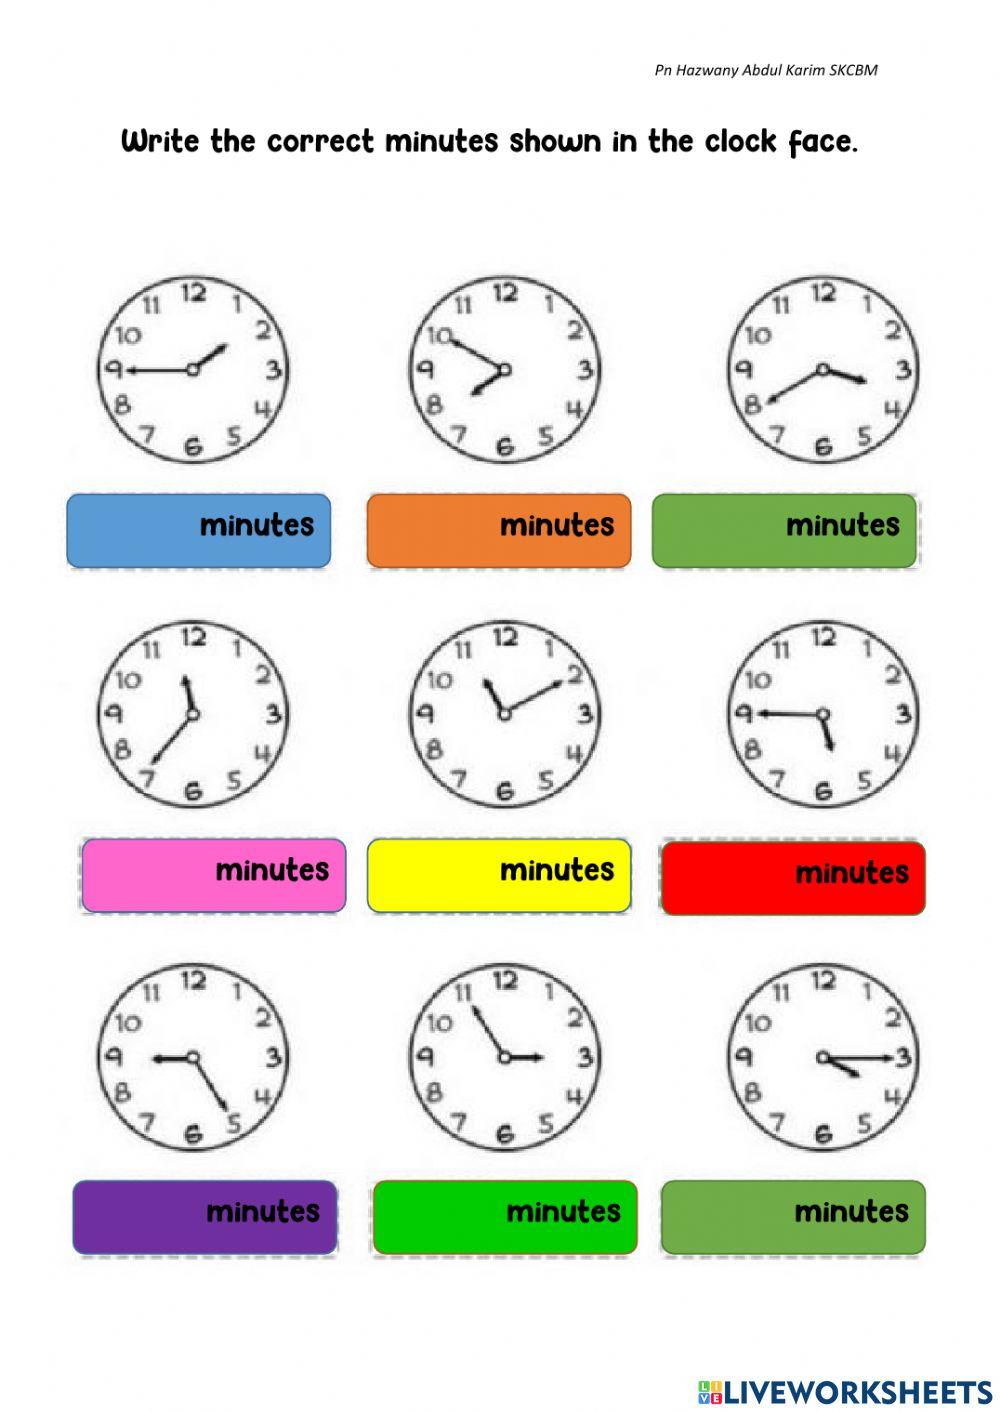 Recognise minutes